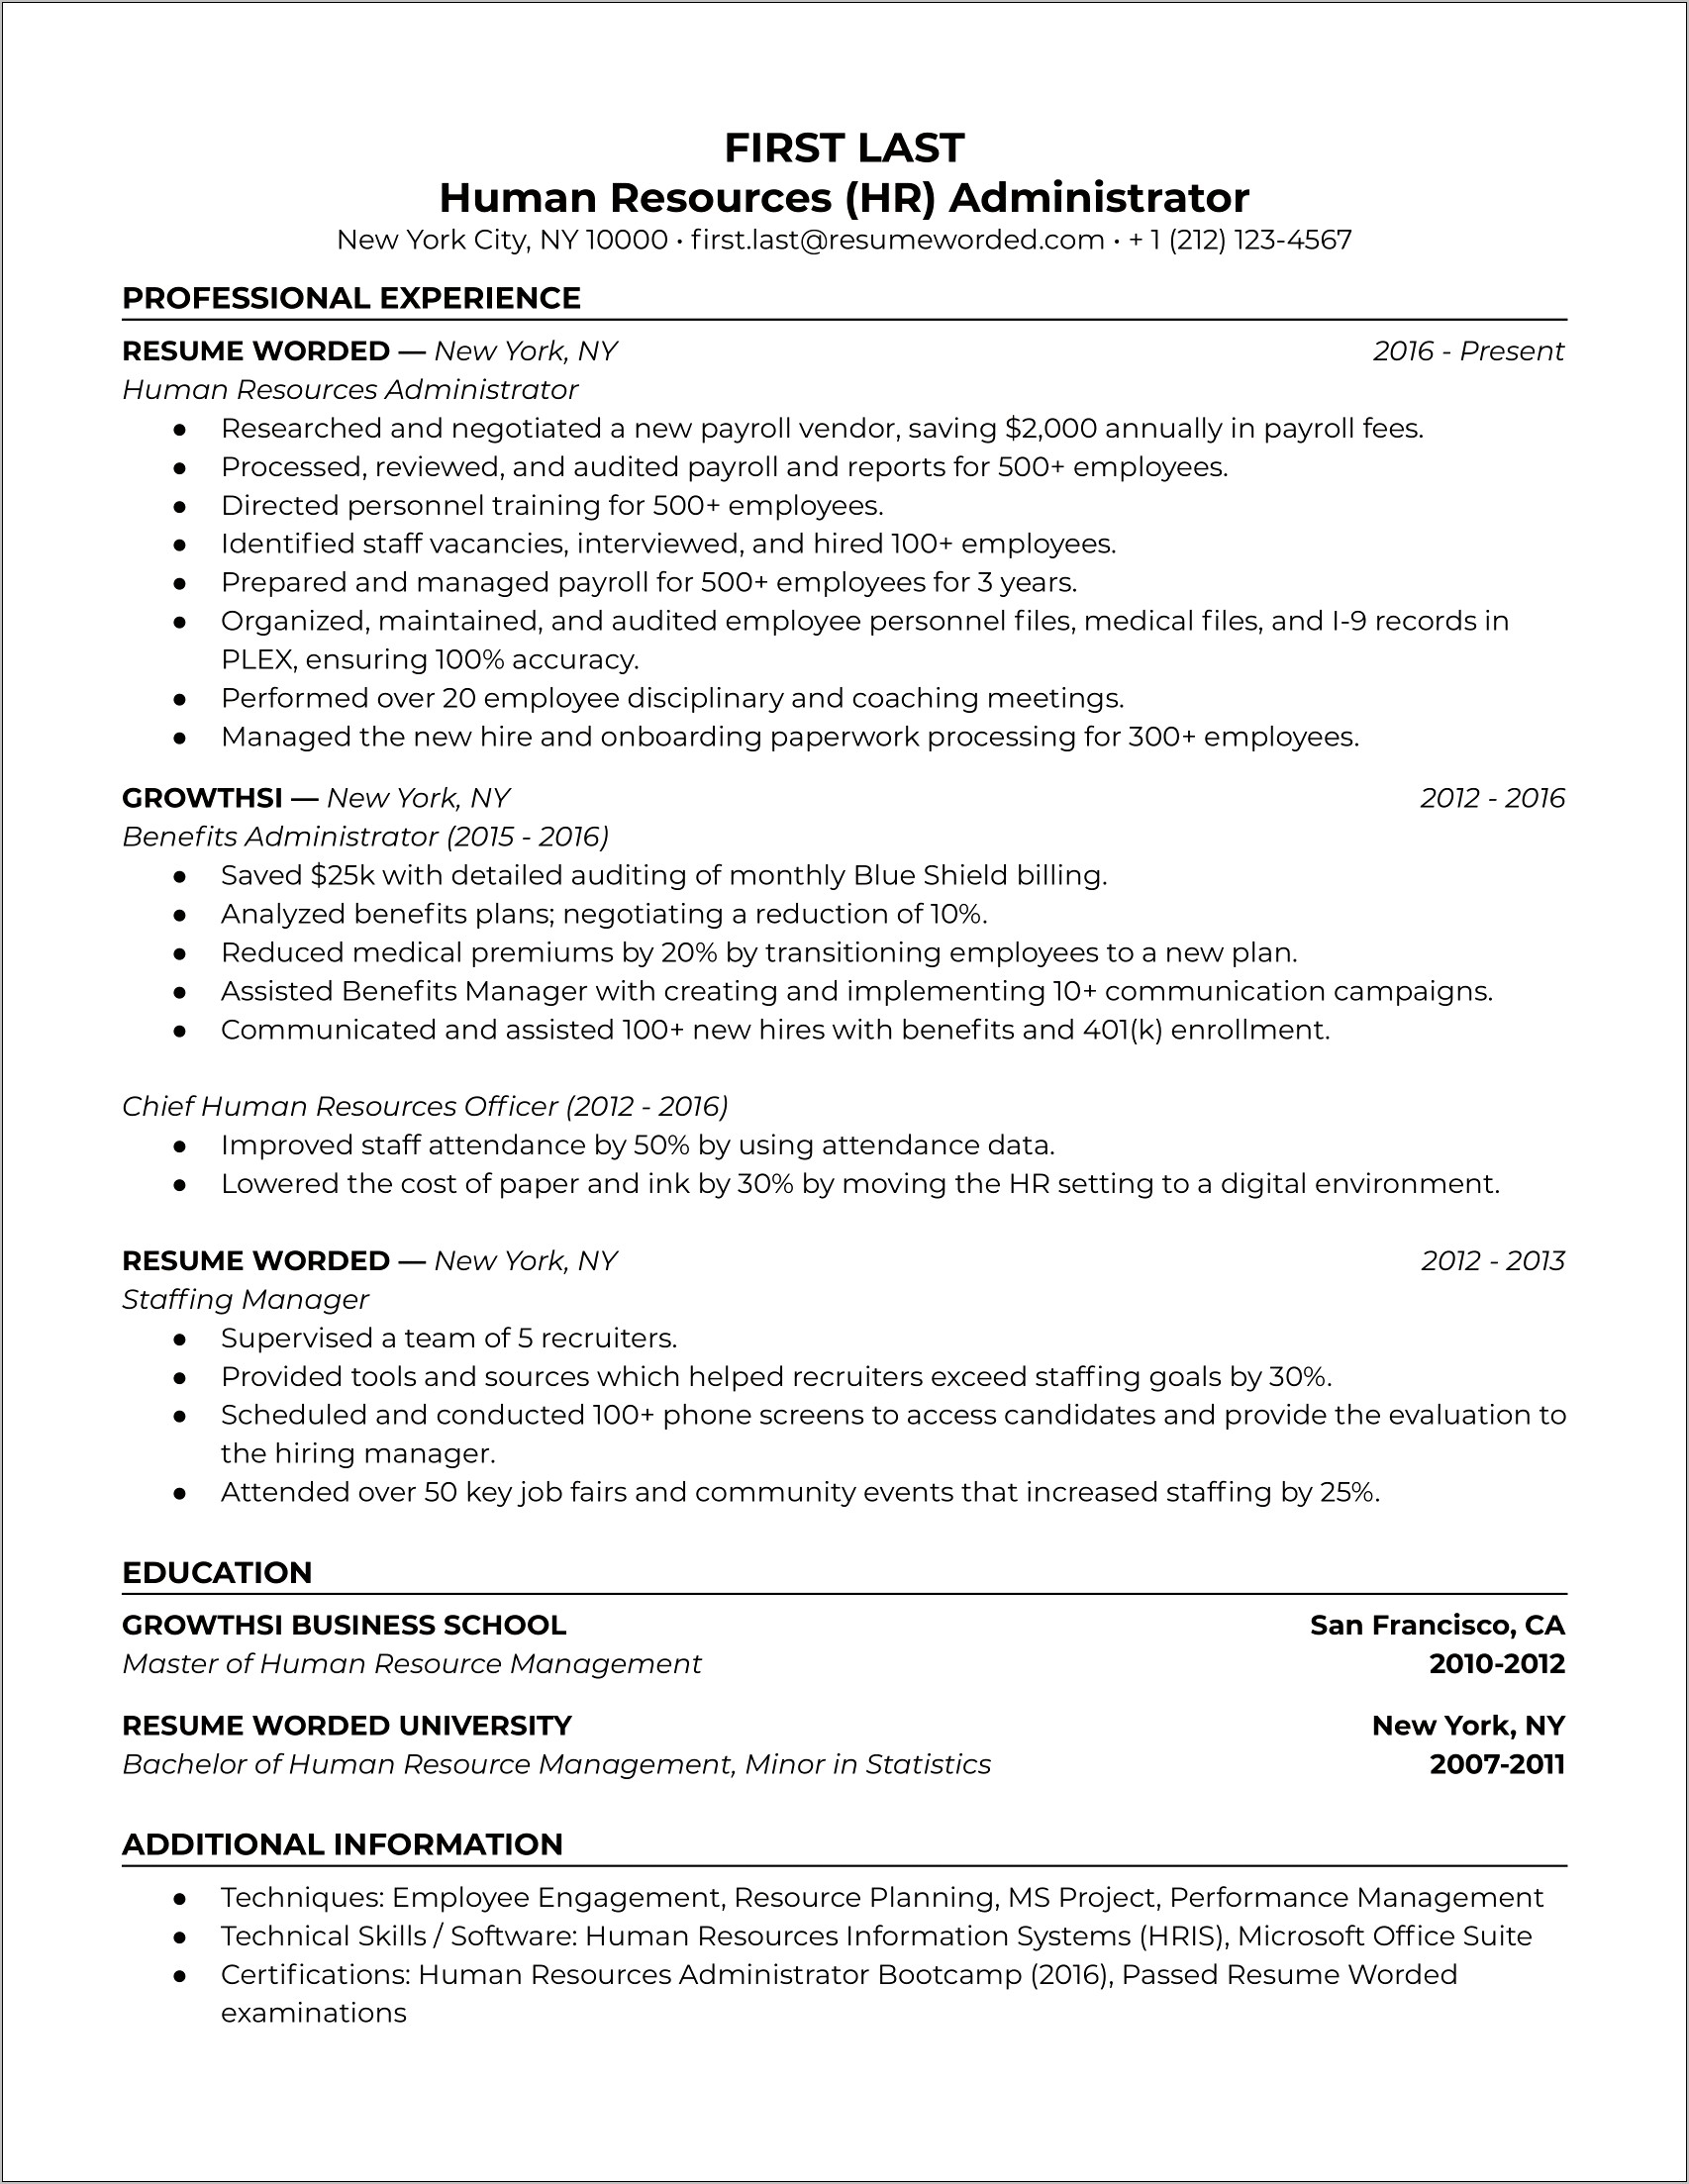 Entry Level Human Resources Assistant Resume Sample